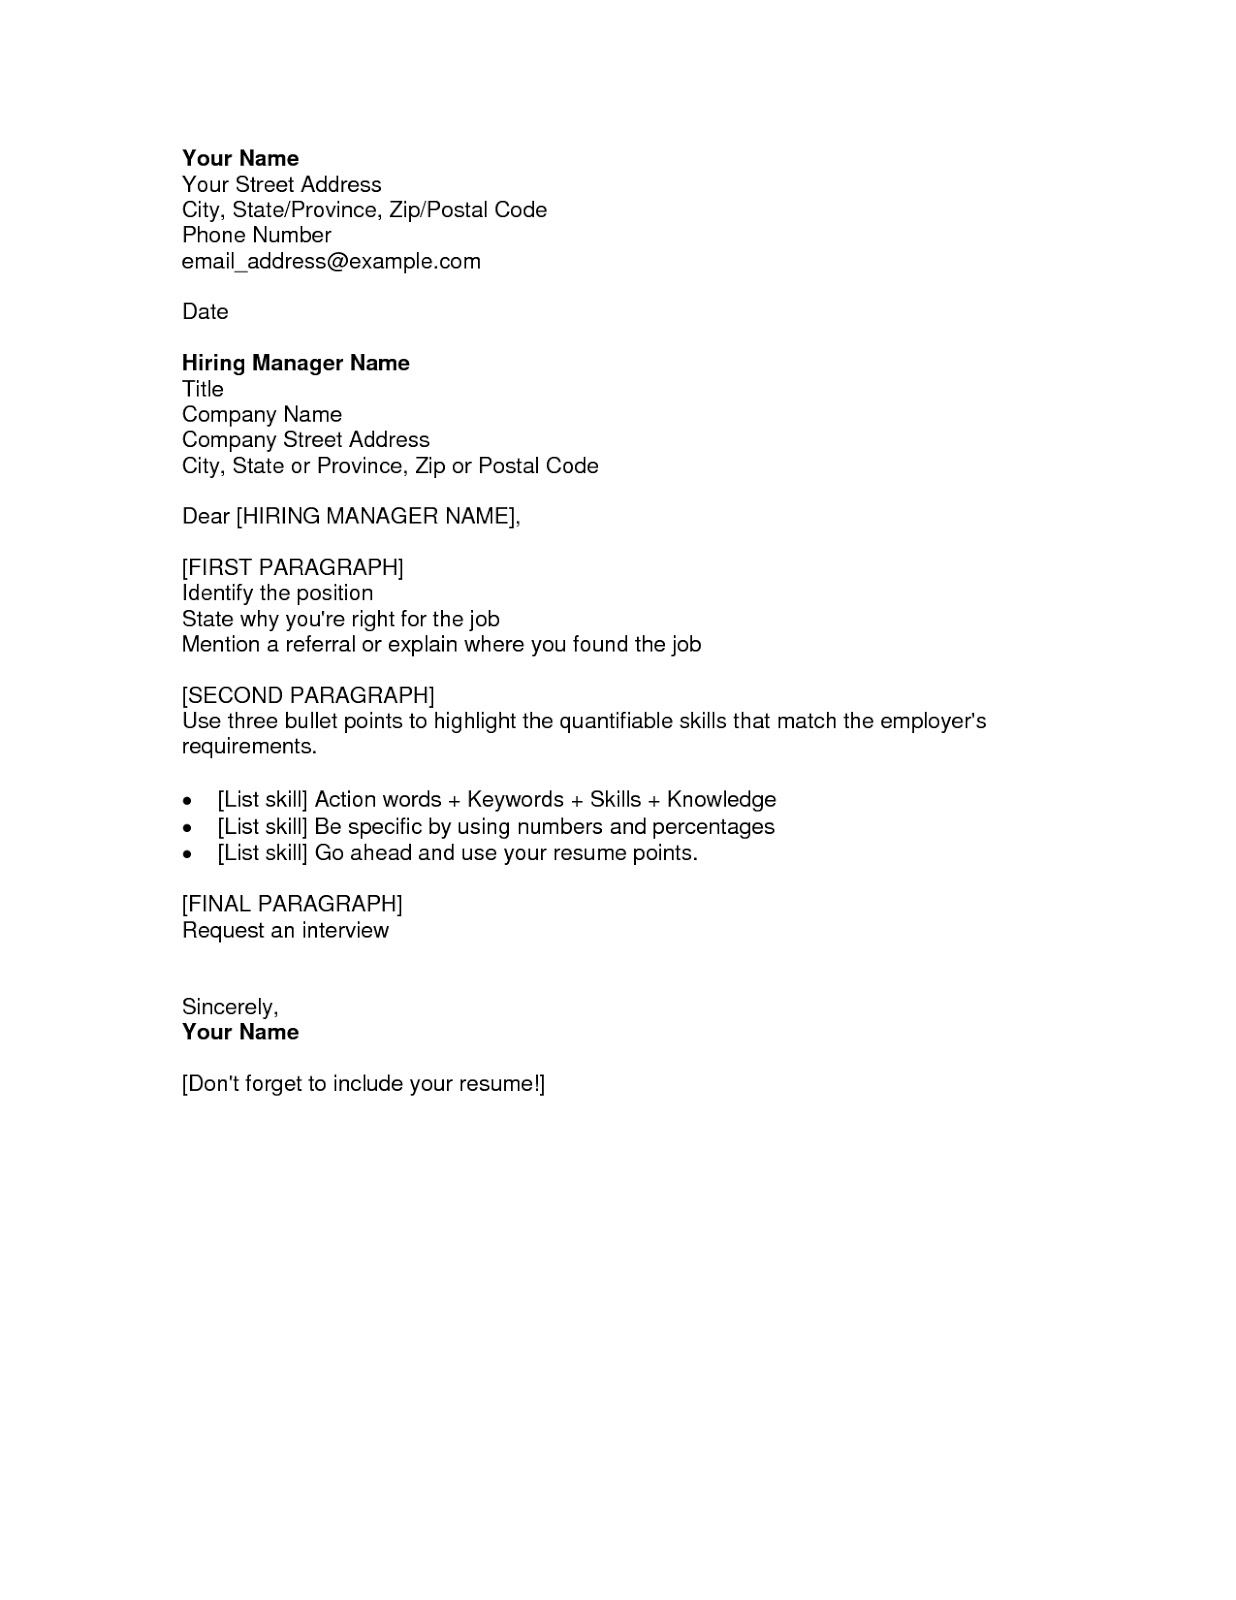 How to write a resume cover letter sample